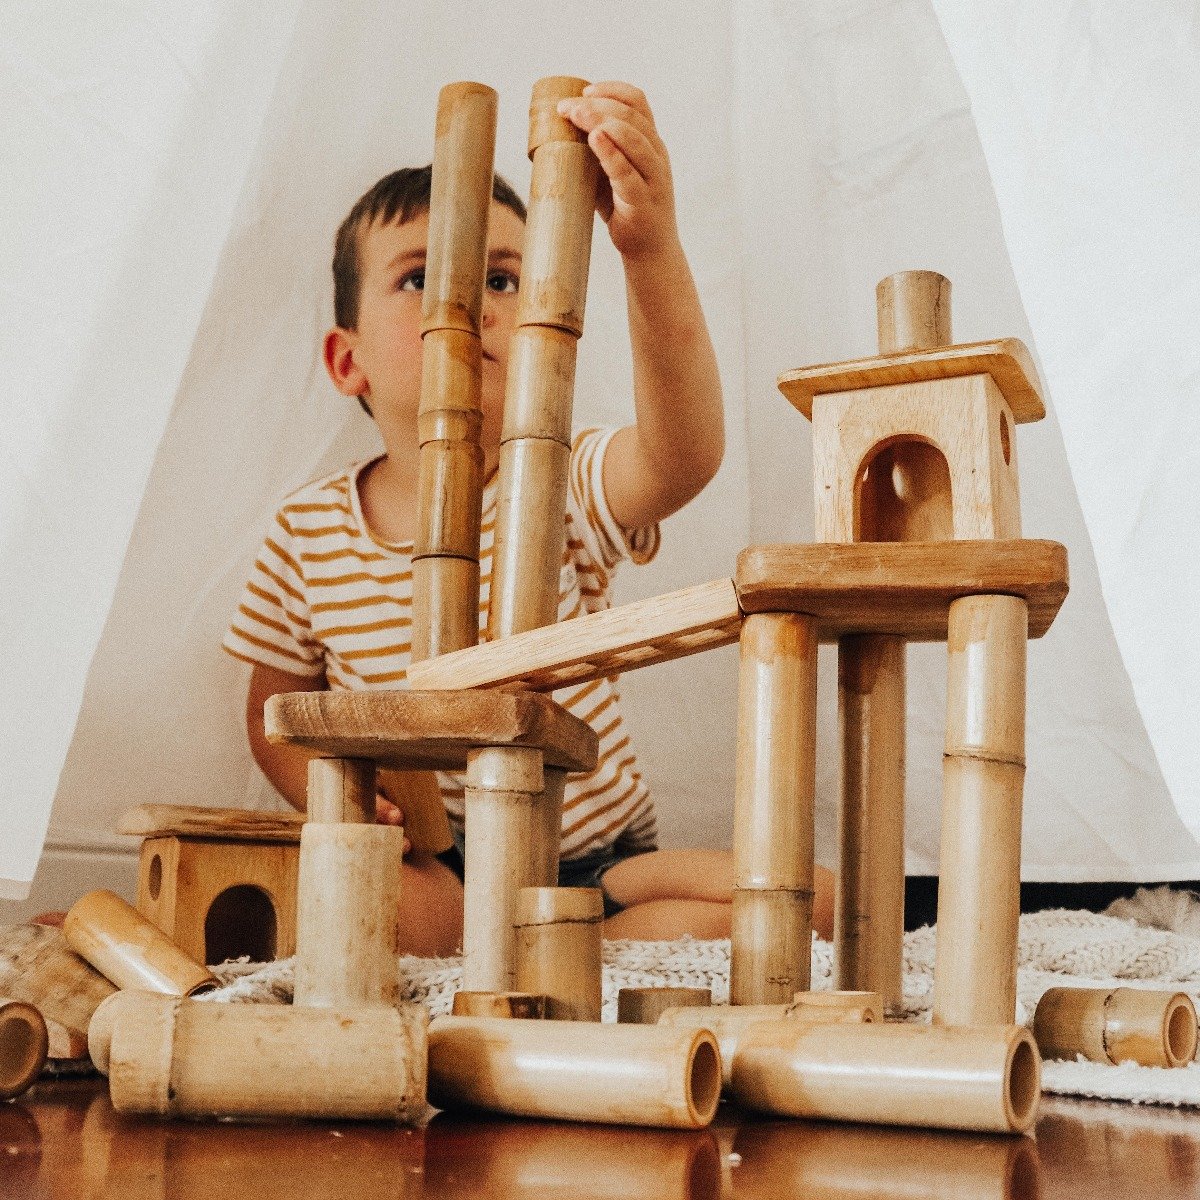 Toys Bamboo Building set with house